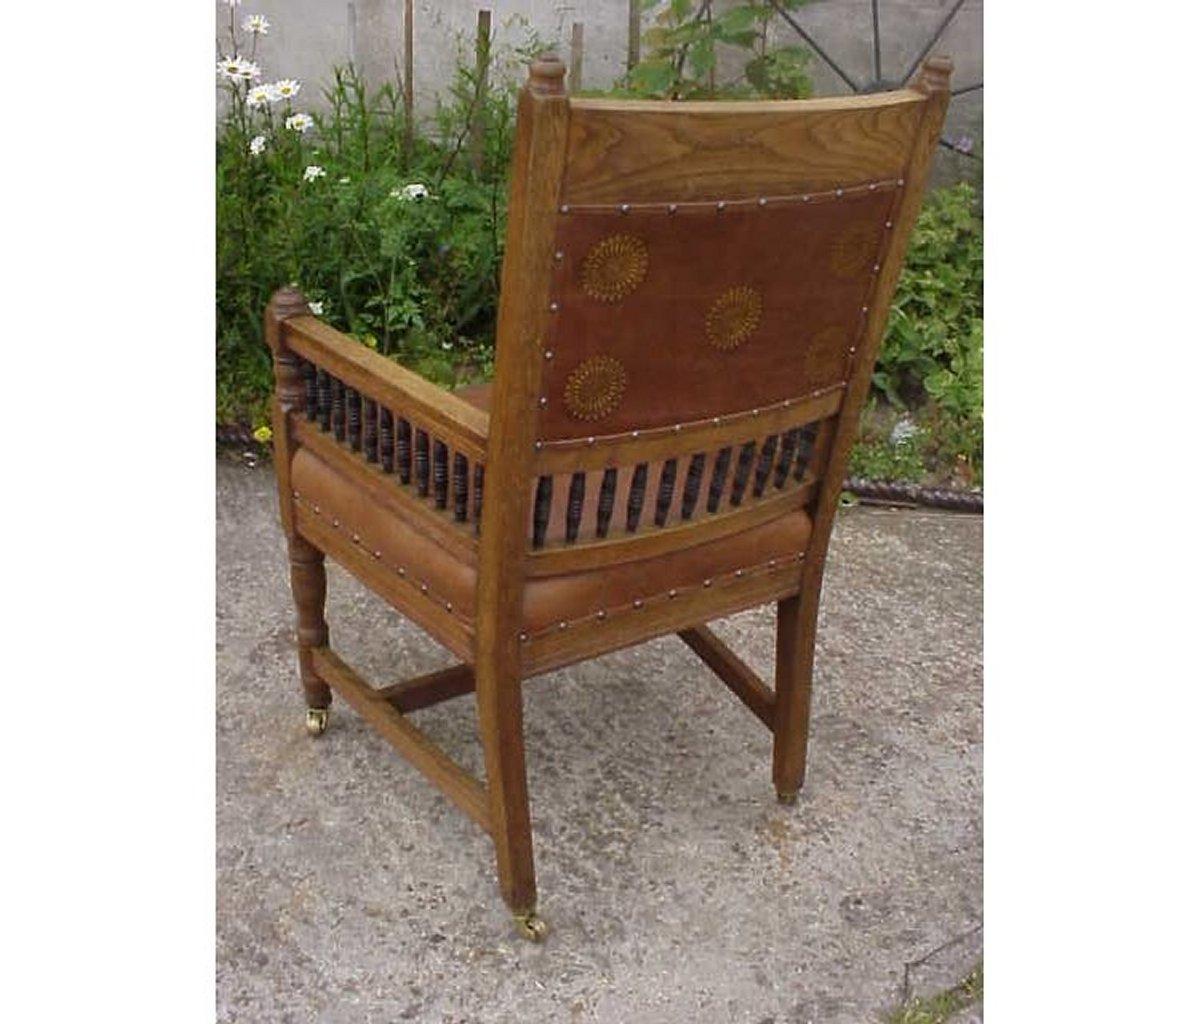 British E W Godwin. An Aesthetic Movement Carved Oak Armchair with Ebonized Spindles